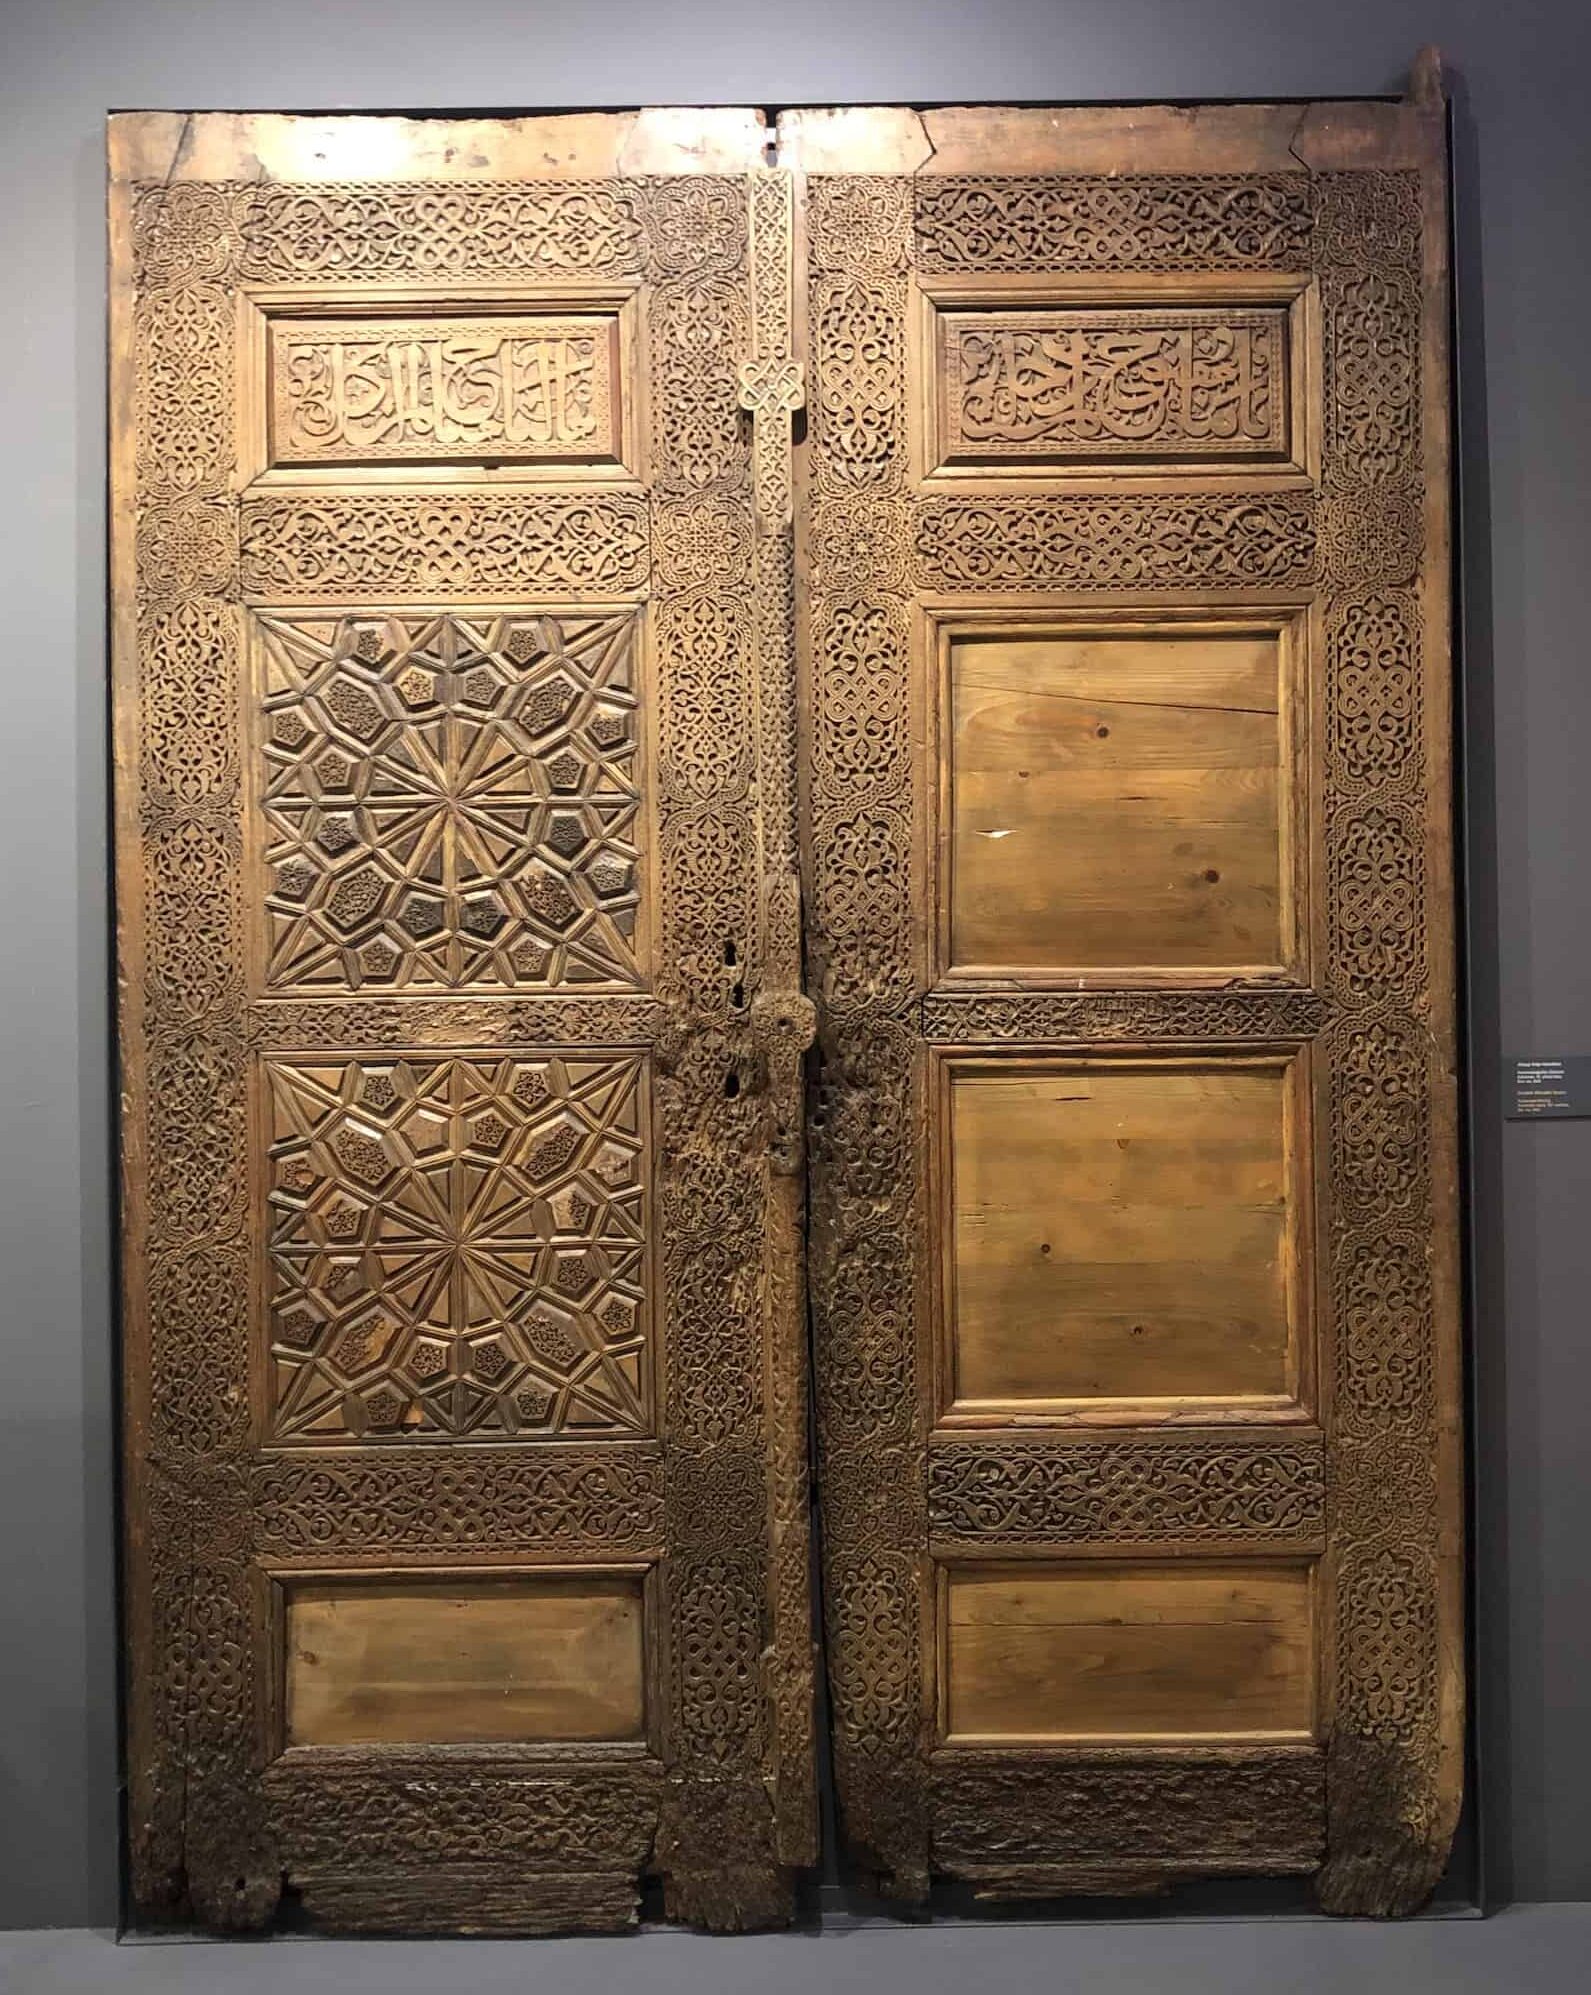 Early 15th century wooden doors from the Karamanid period in Principalities and Early Ottoman Empire at the Museum of Turkish and Islamic Arts in Istanbul, Turkey